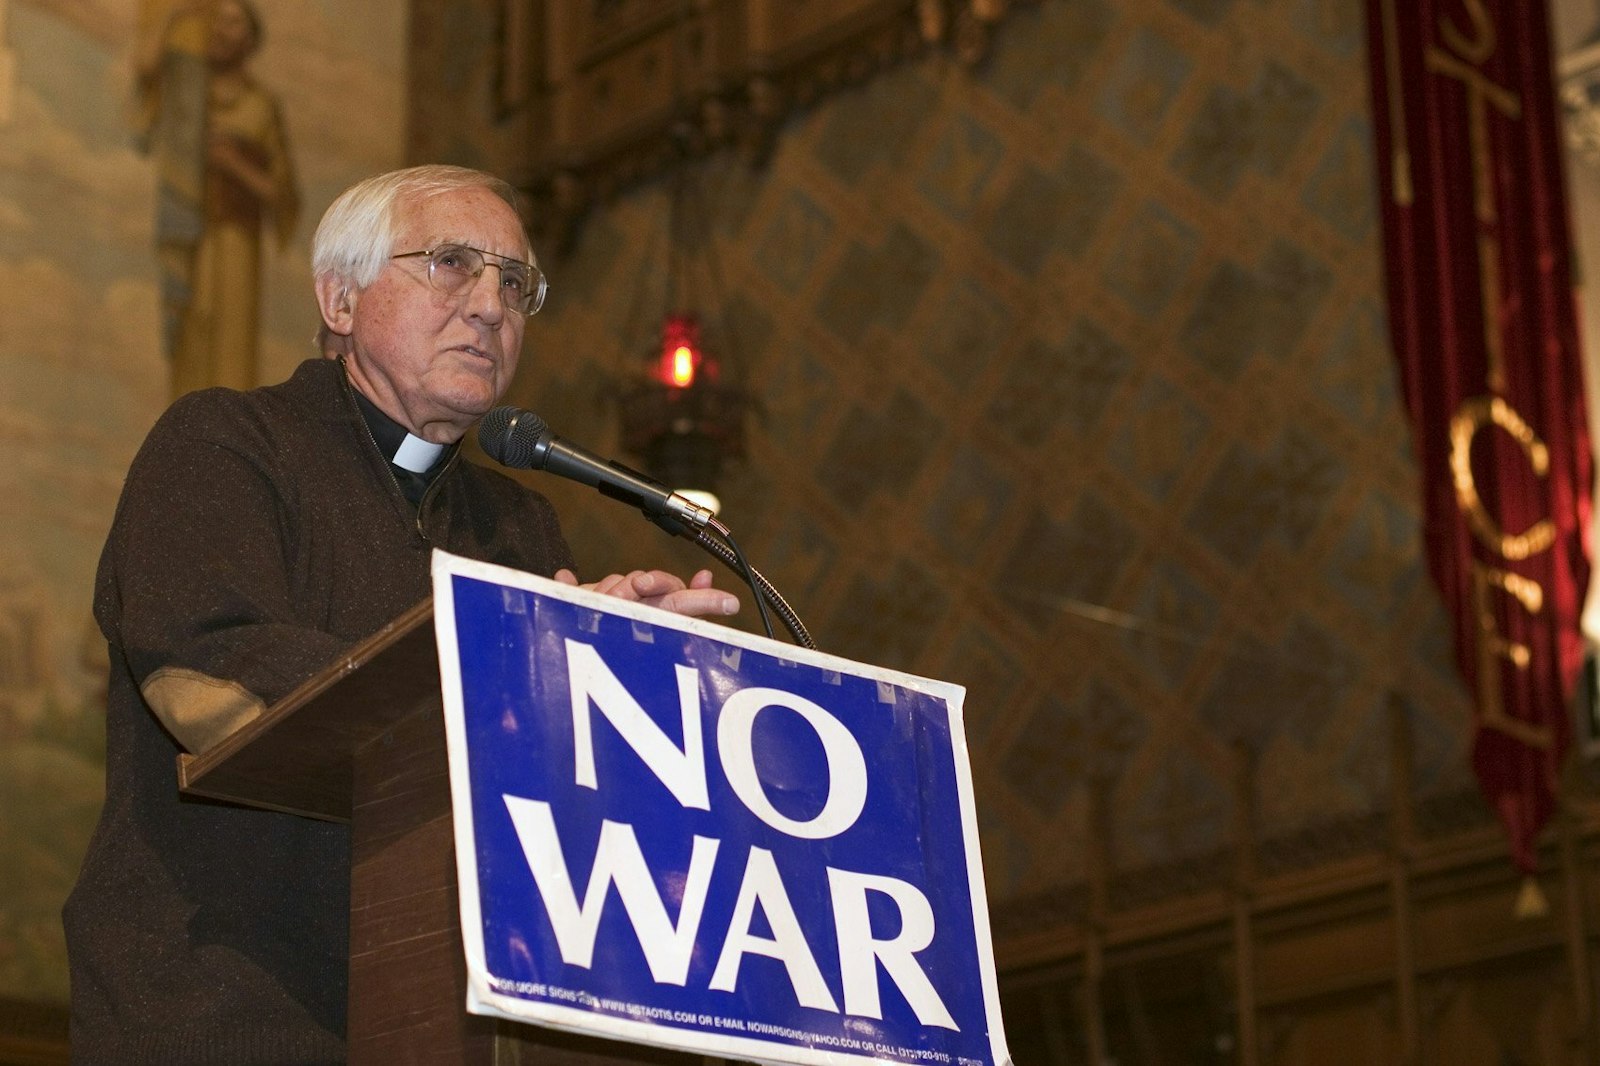 Bishop Gumbleton addresses several hundred anti-war activists at Central United Methodist Church in Detroit on March 18, 2005, to mark the second anniversary of the U.S. invasion of Iraq. (Jim West | CNS photo)